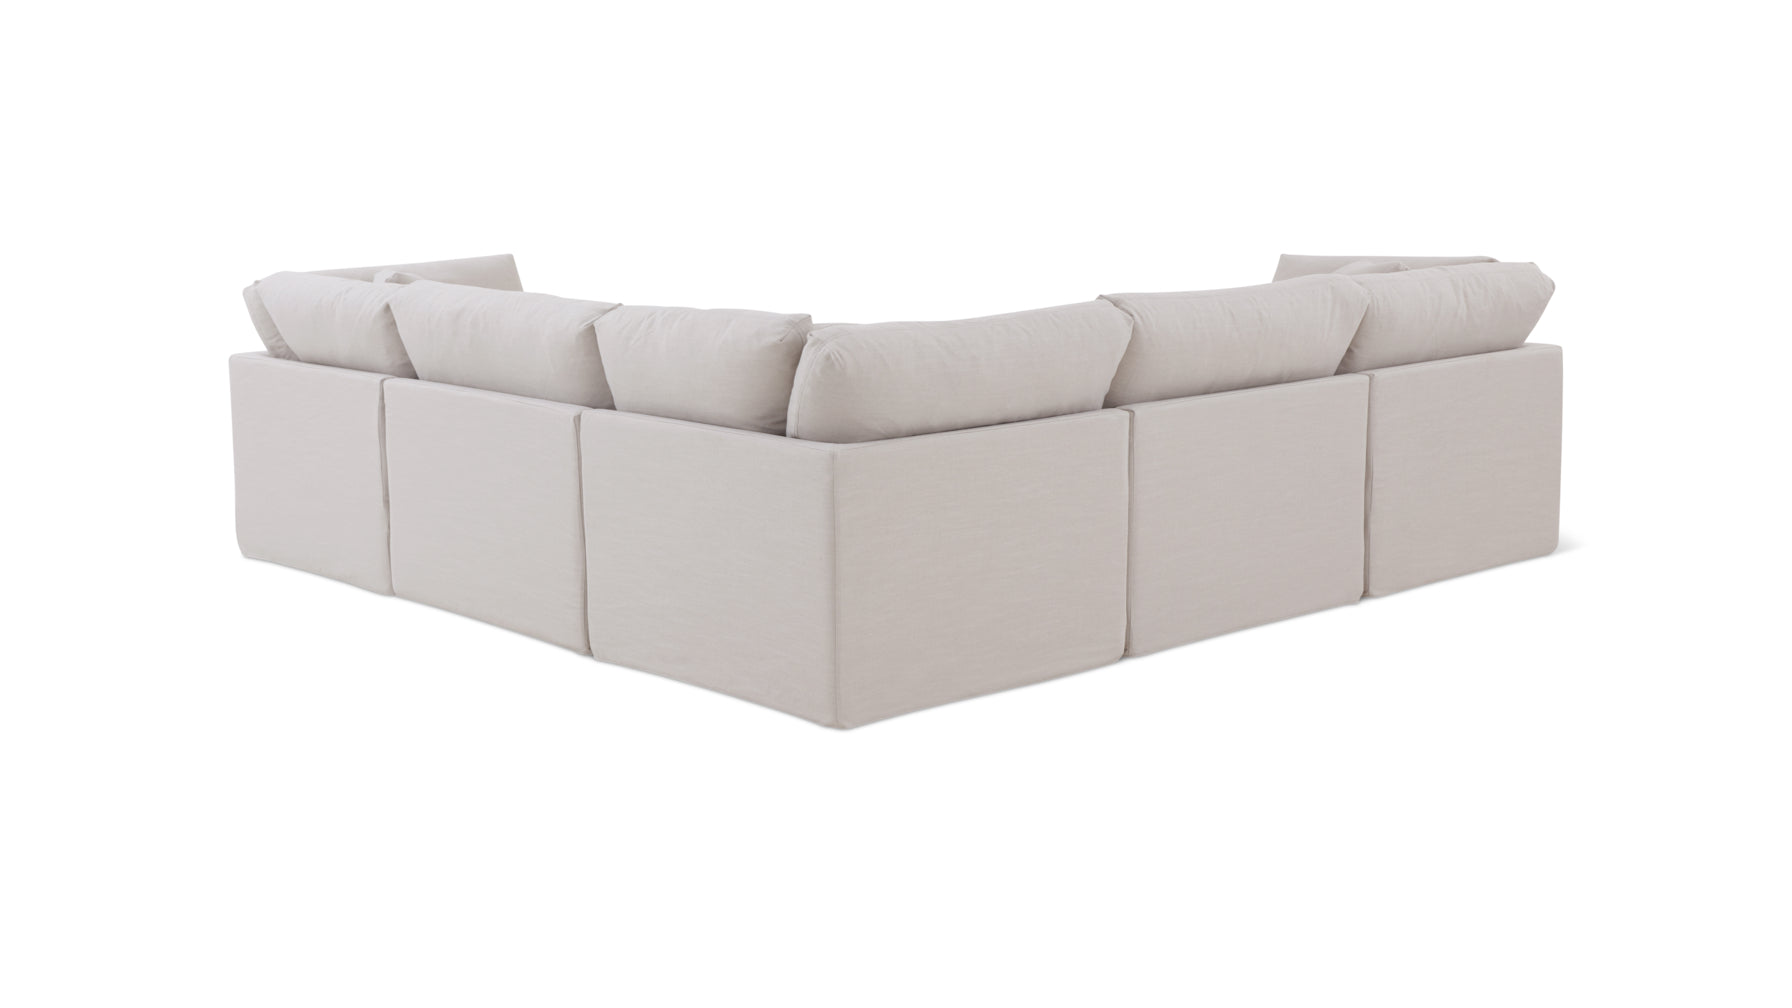 Get Together™ 5-Piece Modular Sectional Closed, Standard, Clay - Image 6